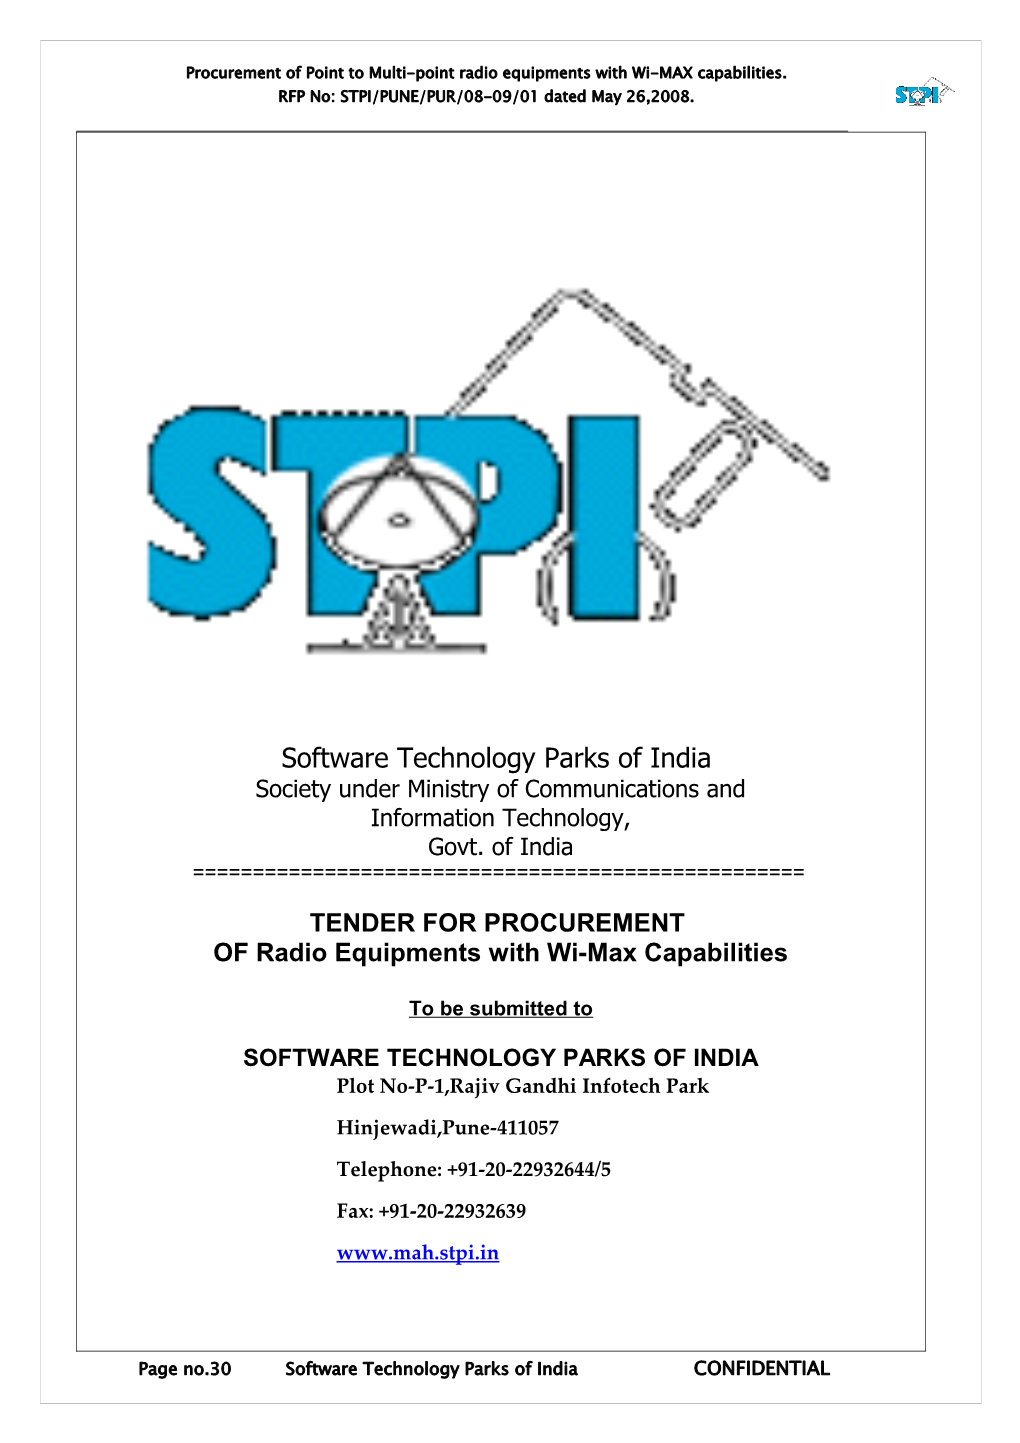 Software Technology Parks of India